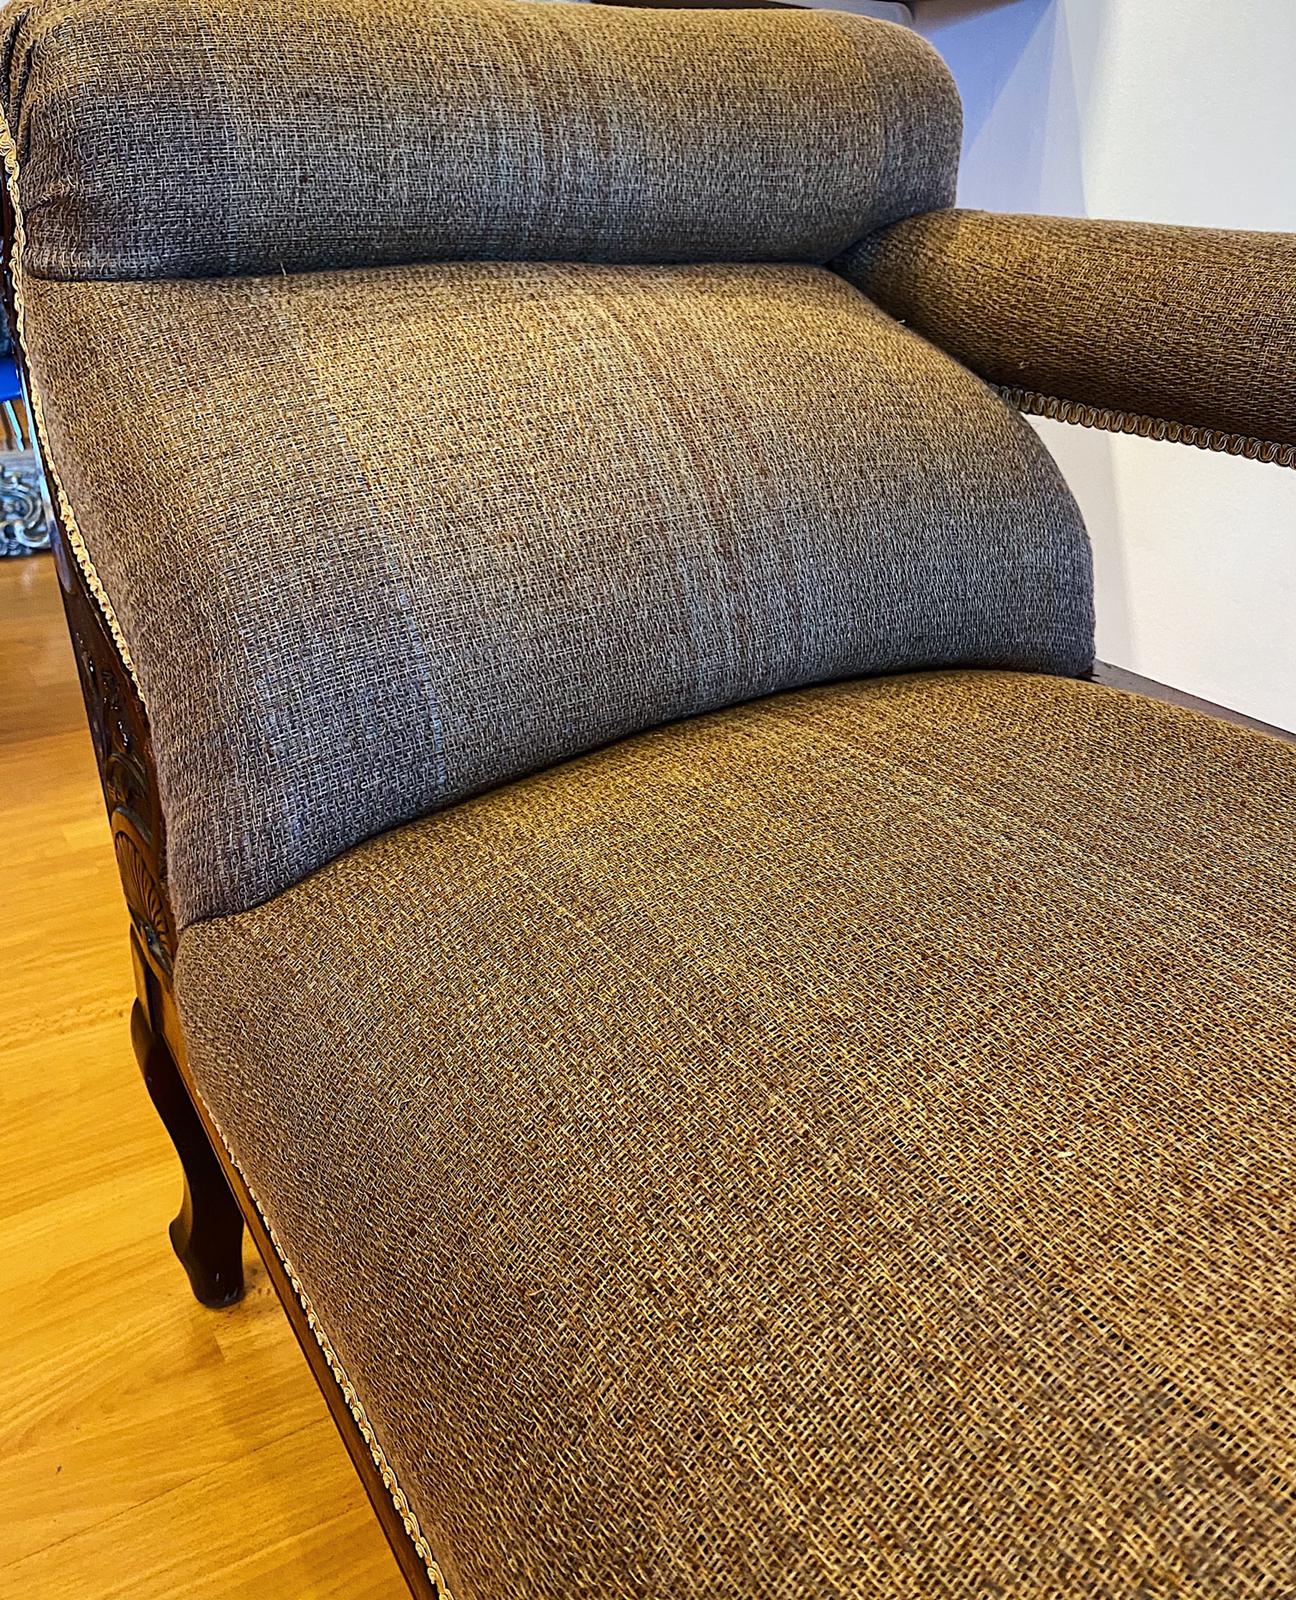 Bespoke upholstery fabric with reels of thread